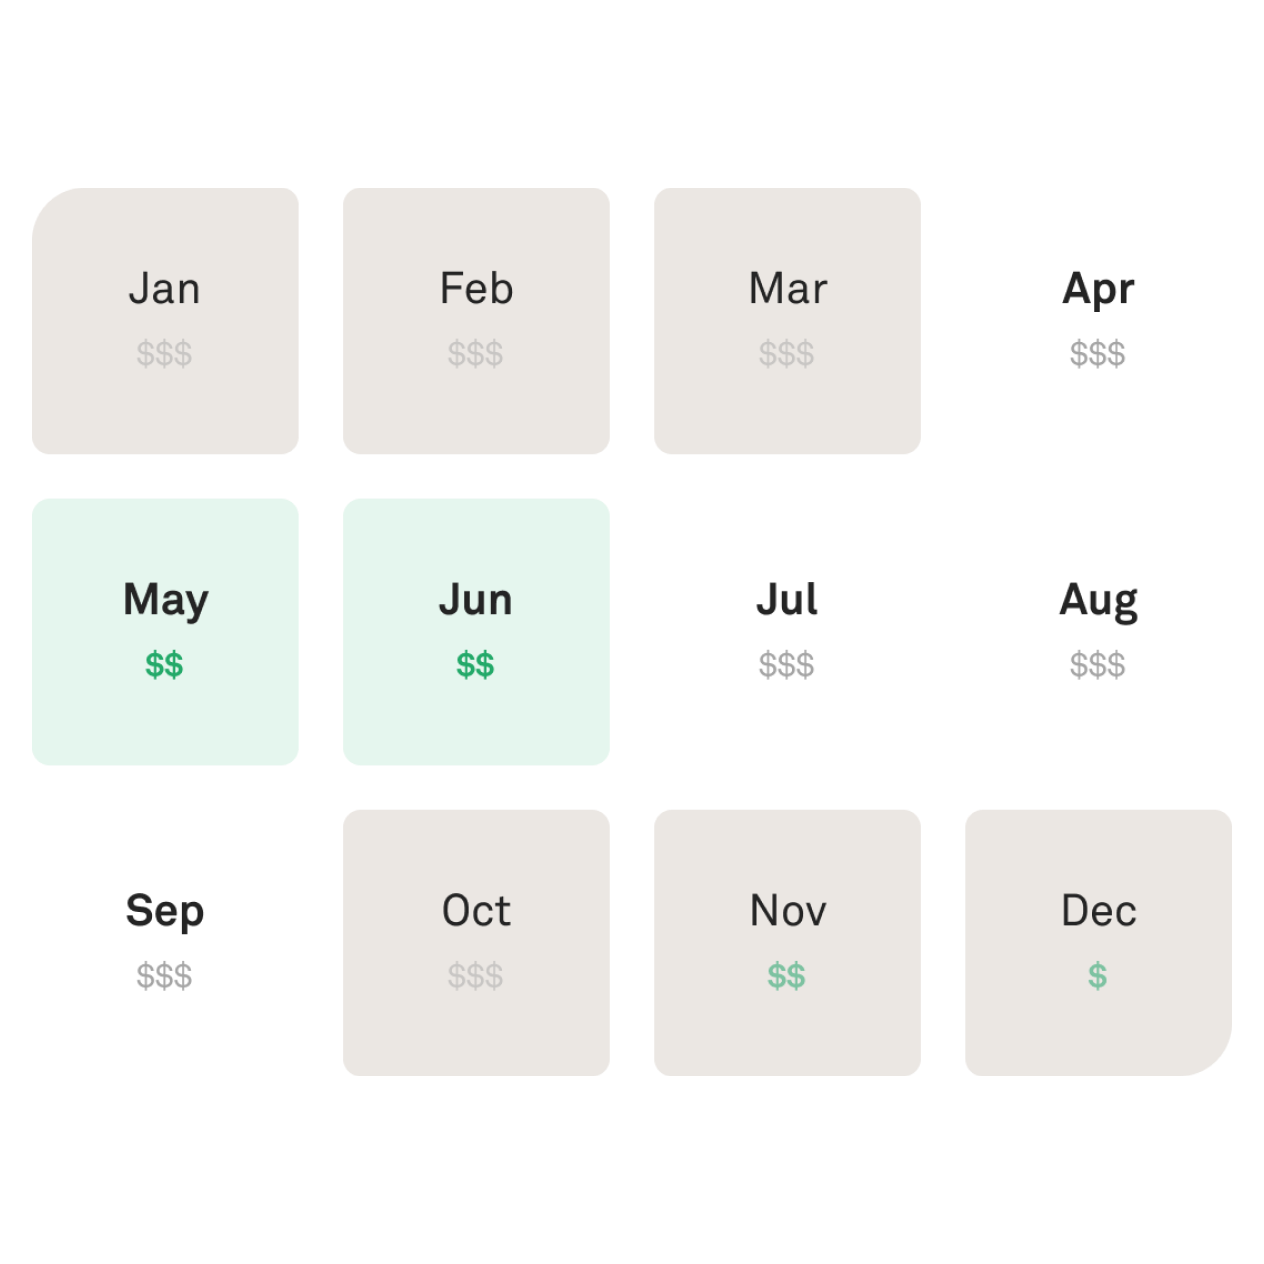 <span class="sunrise-text-gradient">Flexible</span> lease lengths and moving dates